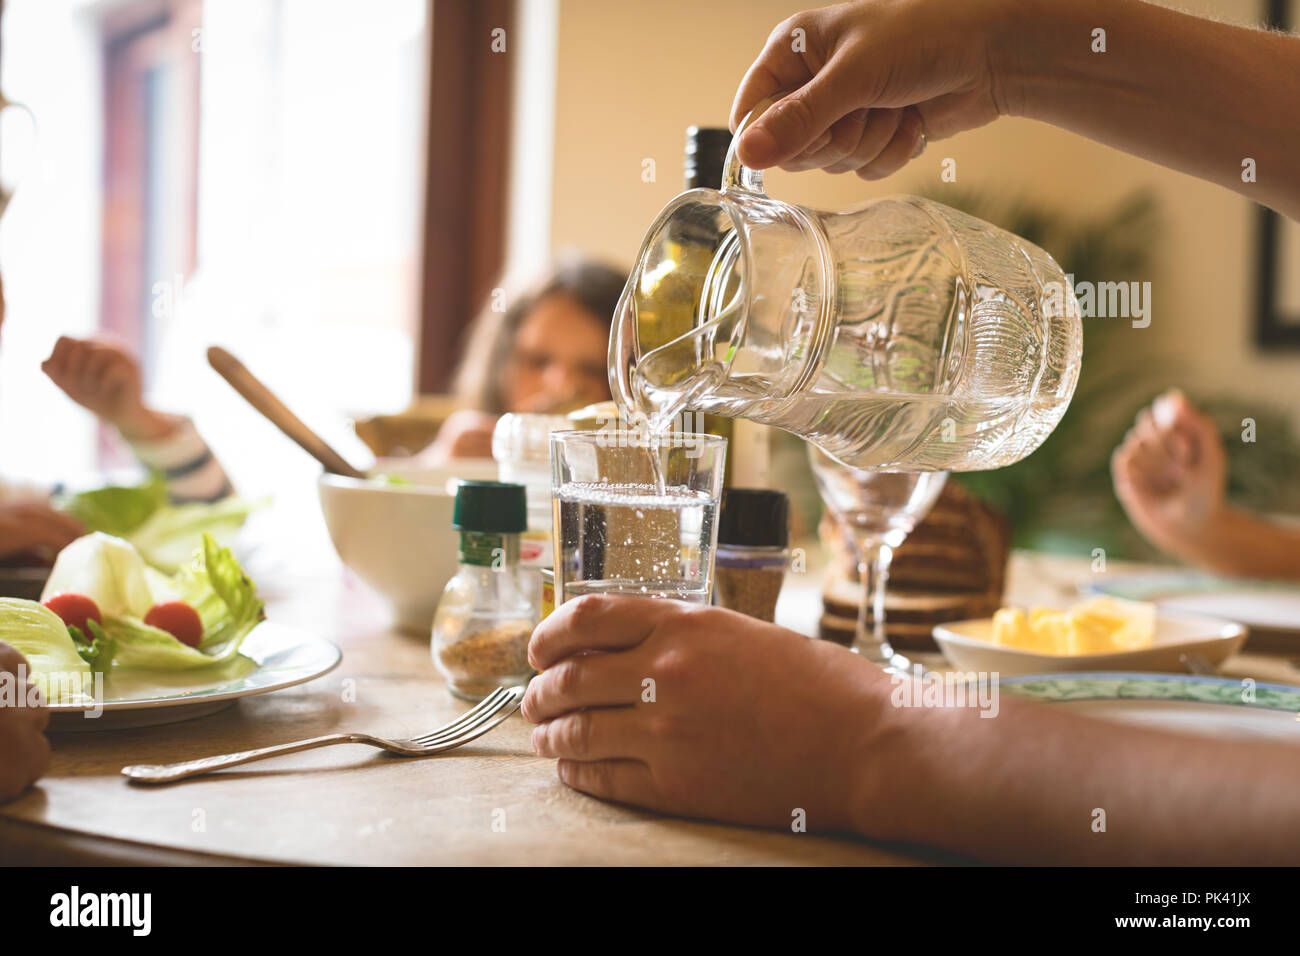 Man serving water in glass on dining table Stock Photo